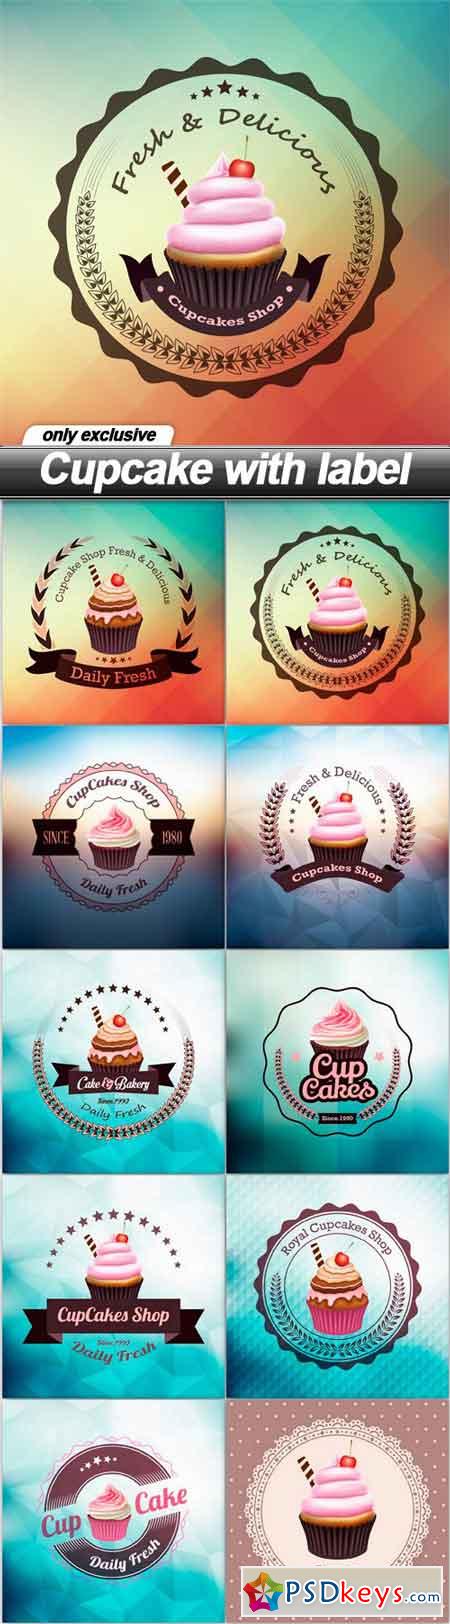 Cupcake with label - 10 EPS